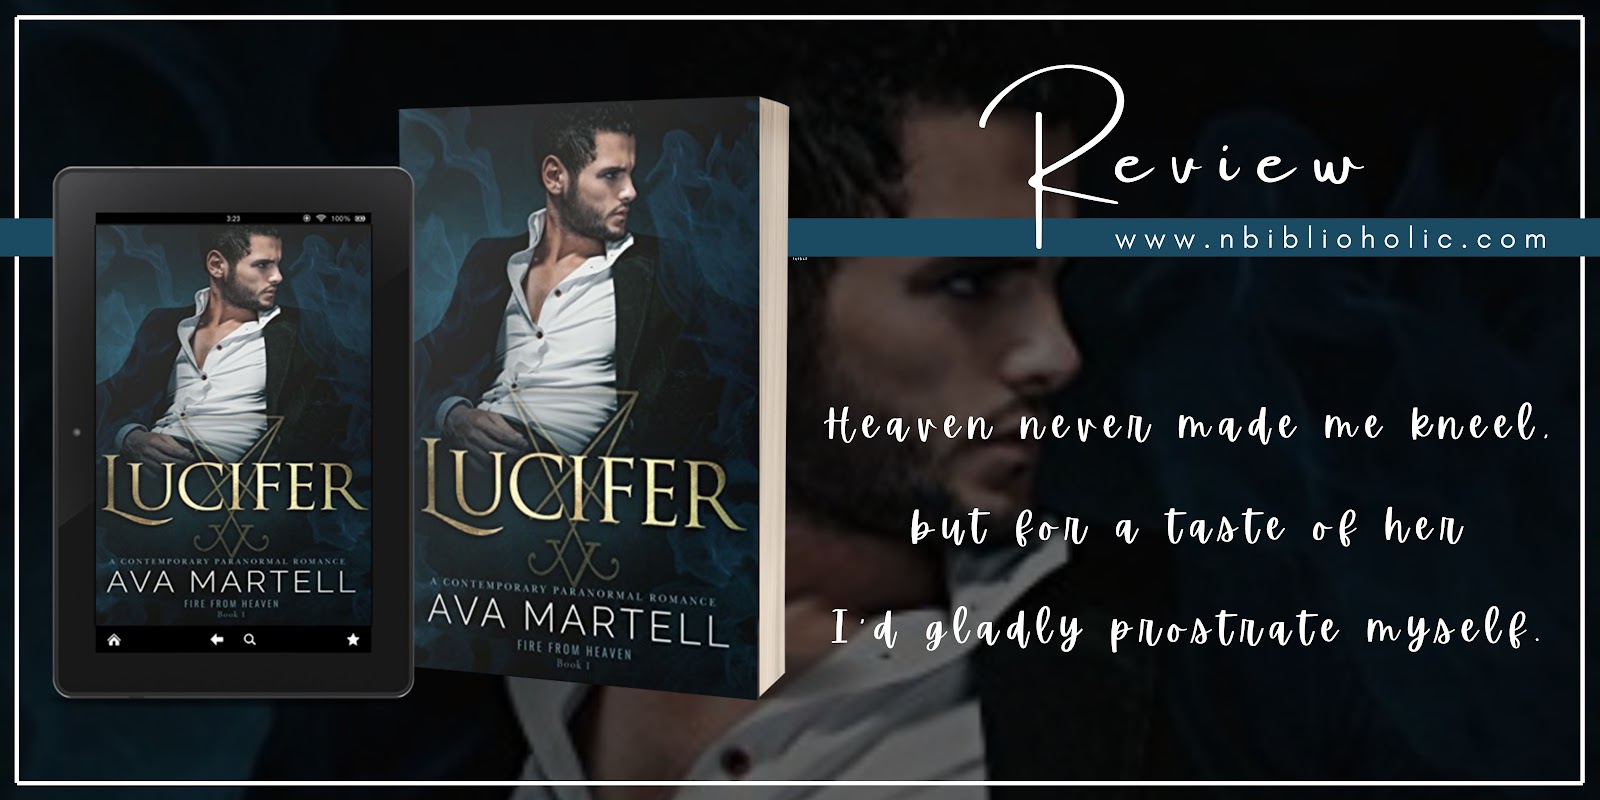 Lucifer by Ava Martell